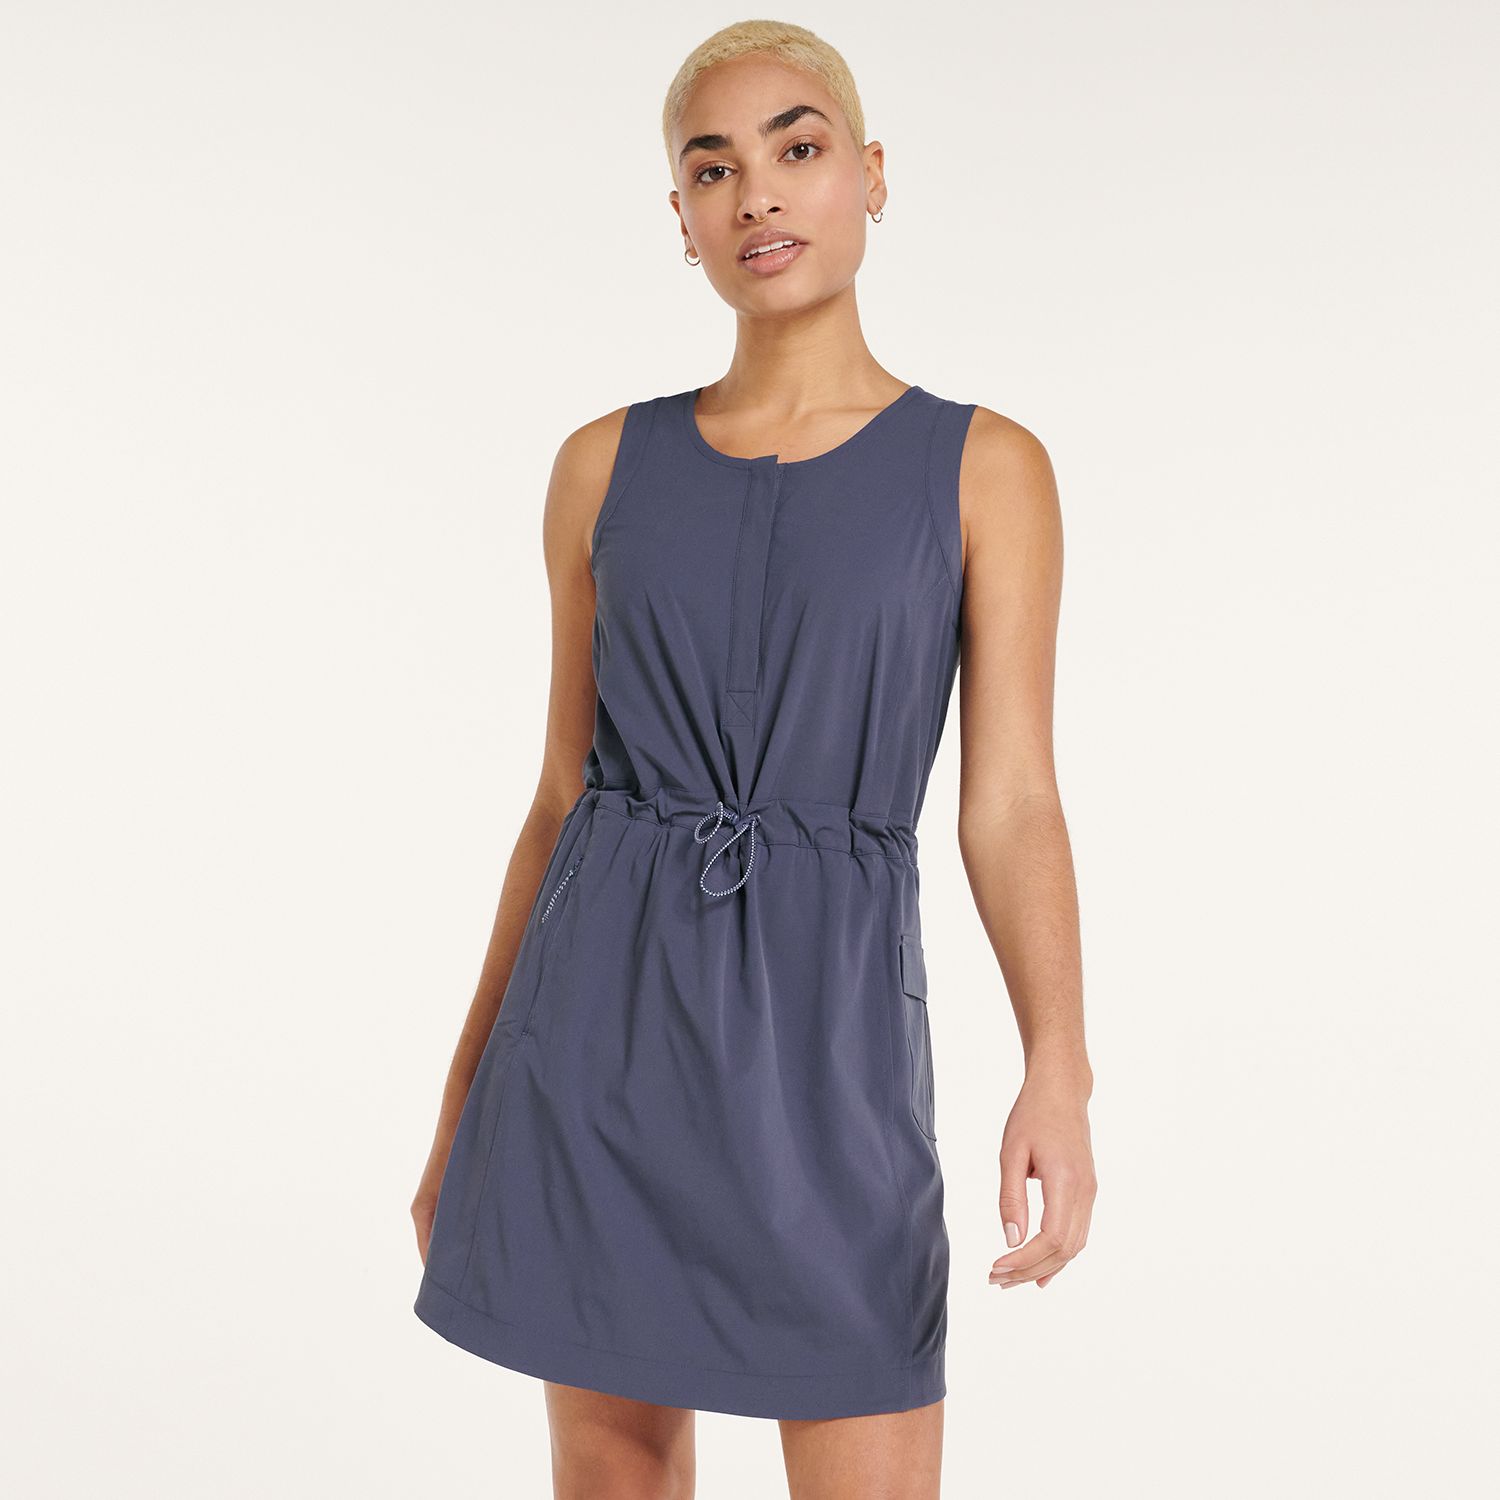 FLX Woven Dress with Built-In Shorts